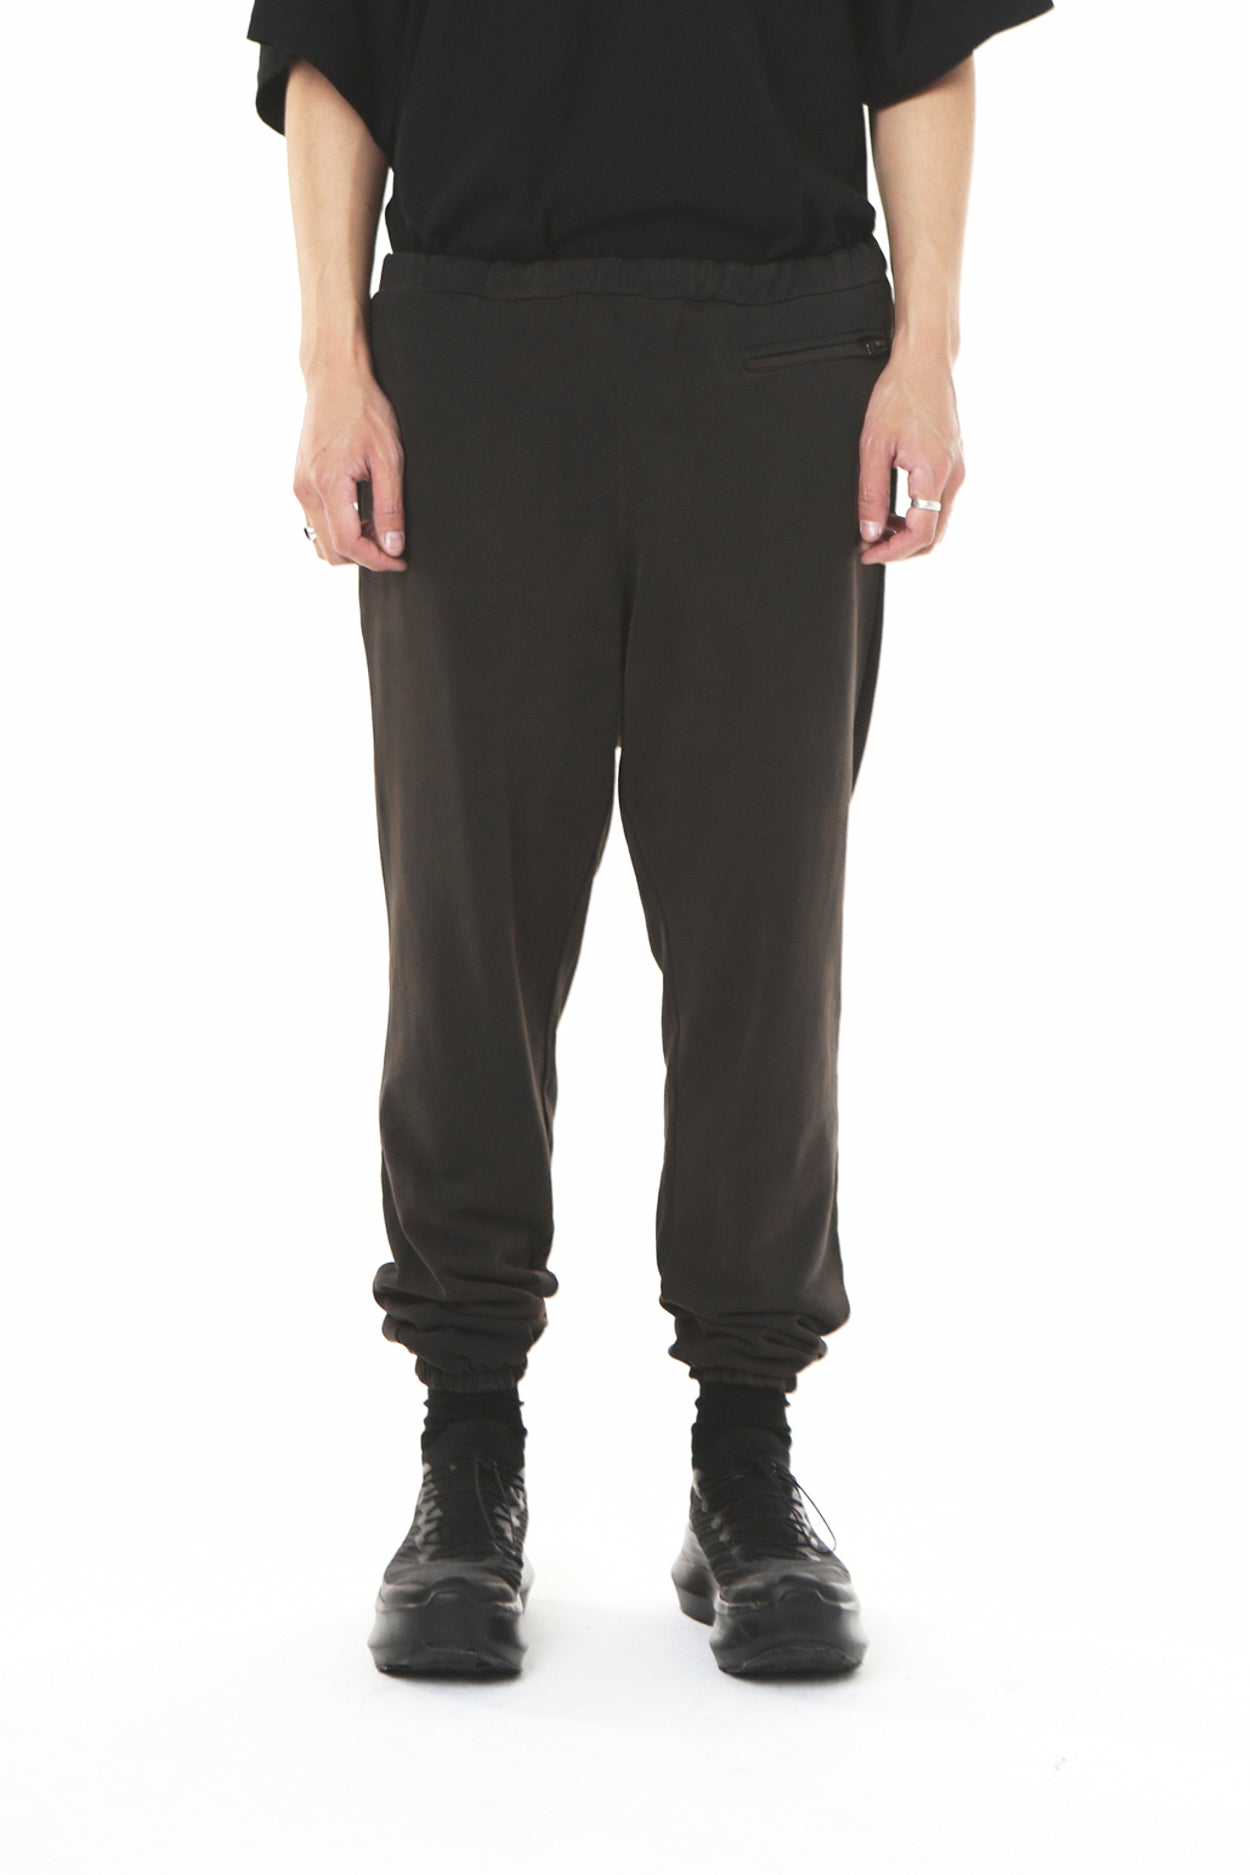 WILLY CHAVARRIA / Big Daddy Sweat Pants Black Clay - Road Sign